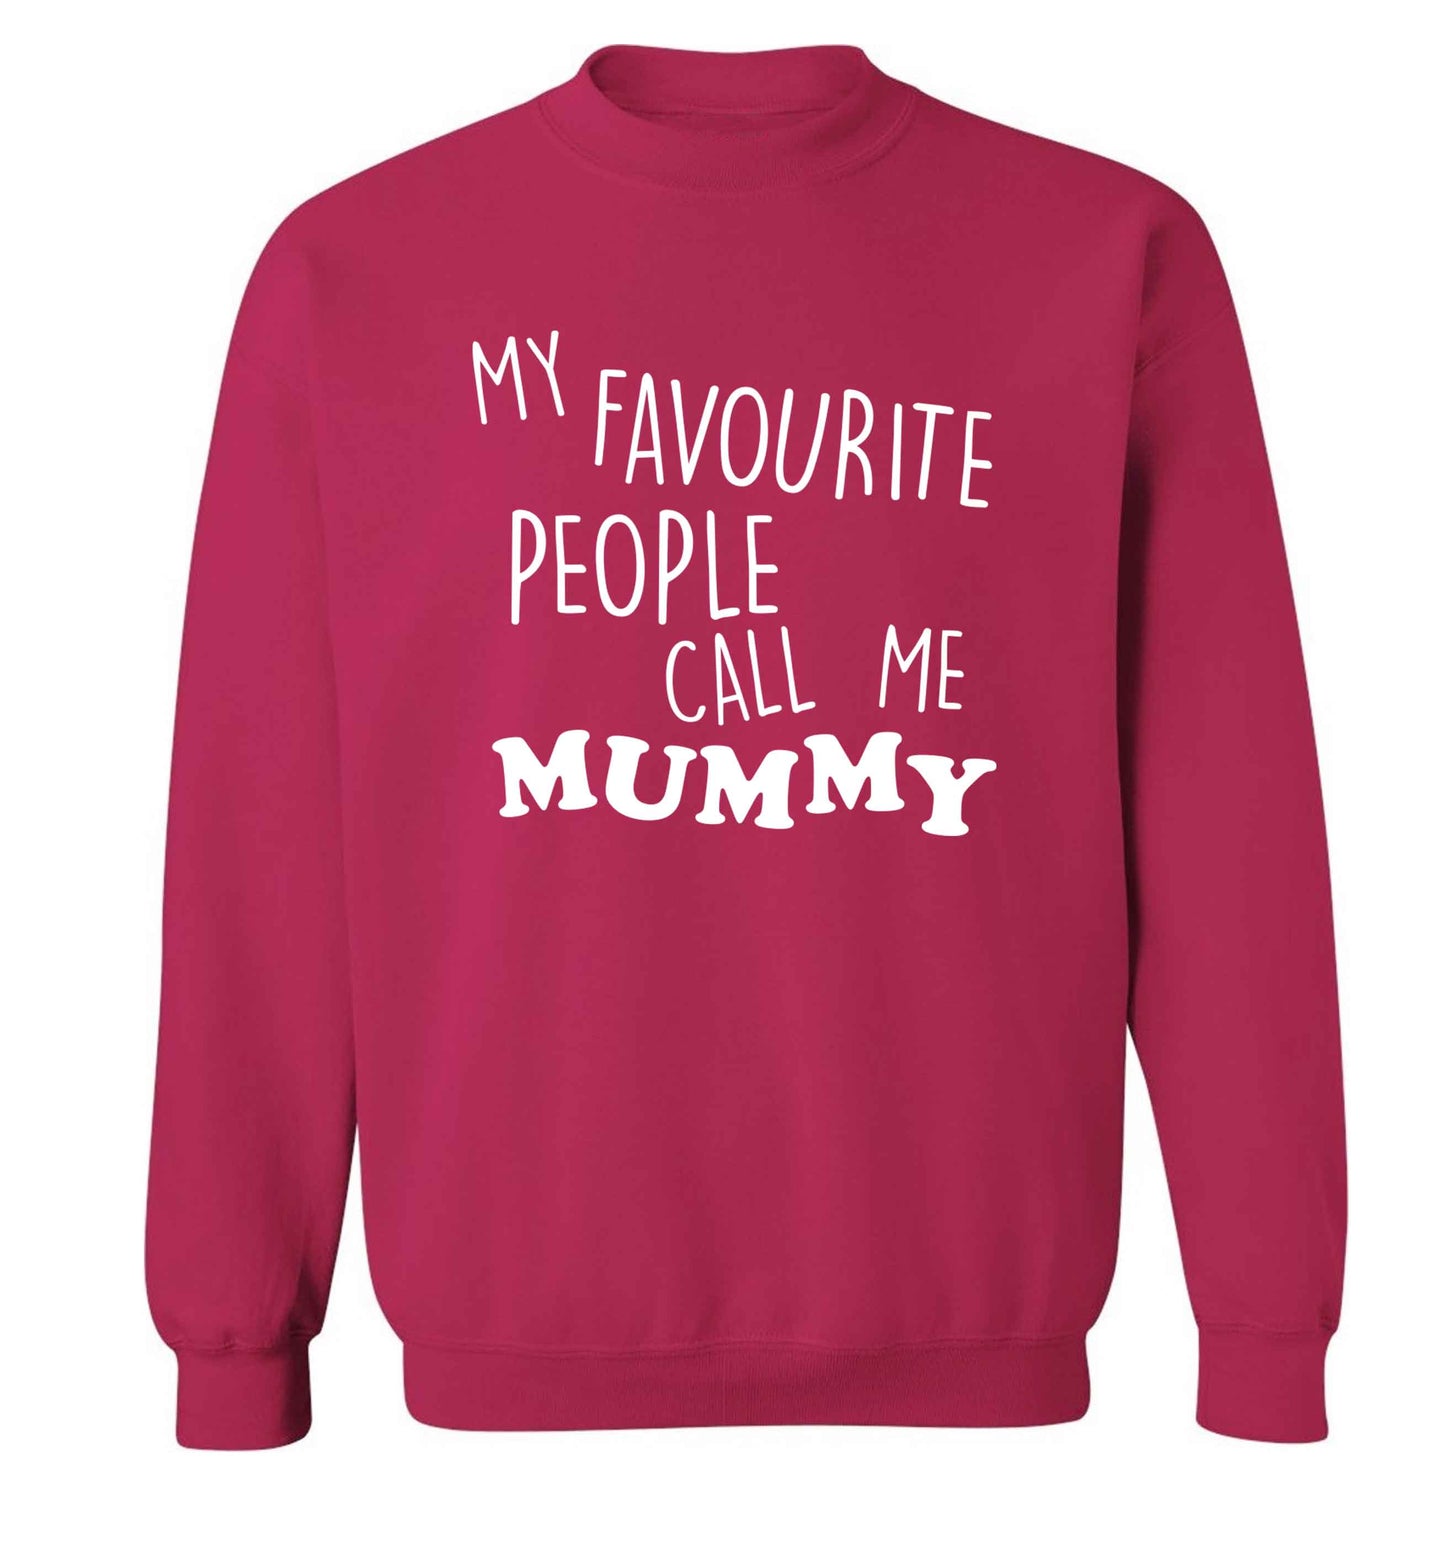 My favourite people call me mummy adult's unisex pink sweater 2XL